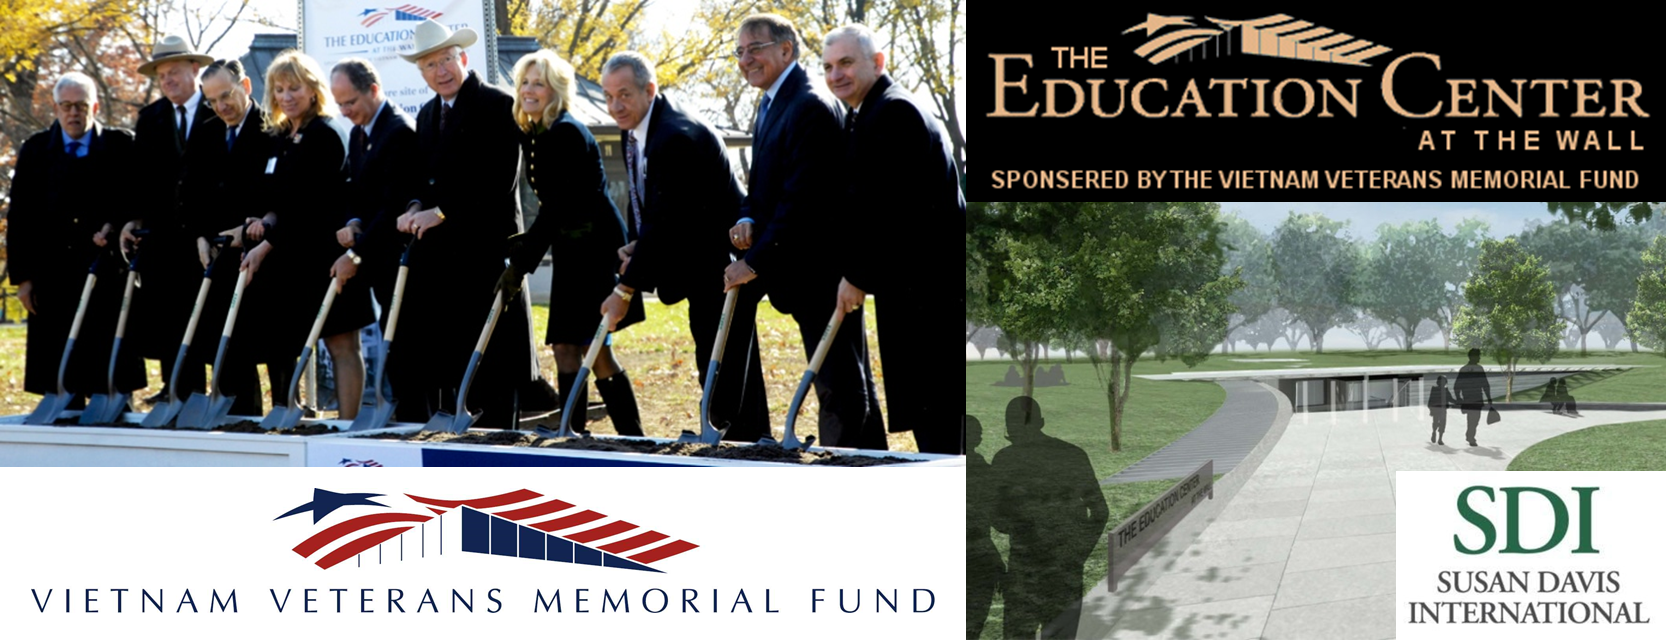  Ceremonial Groundbreaking for The Education Center at The Wall - Logo - https://s39939.pcdn.co/wp-content/uploads/2018/11/sdi-vvmf-ed.png